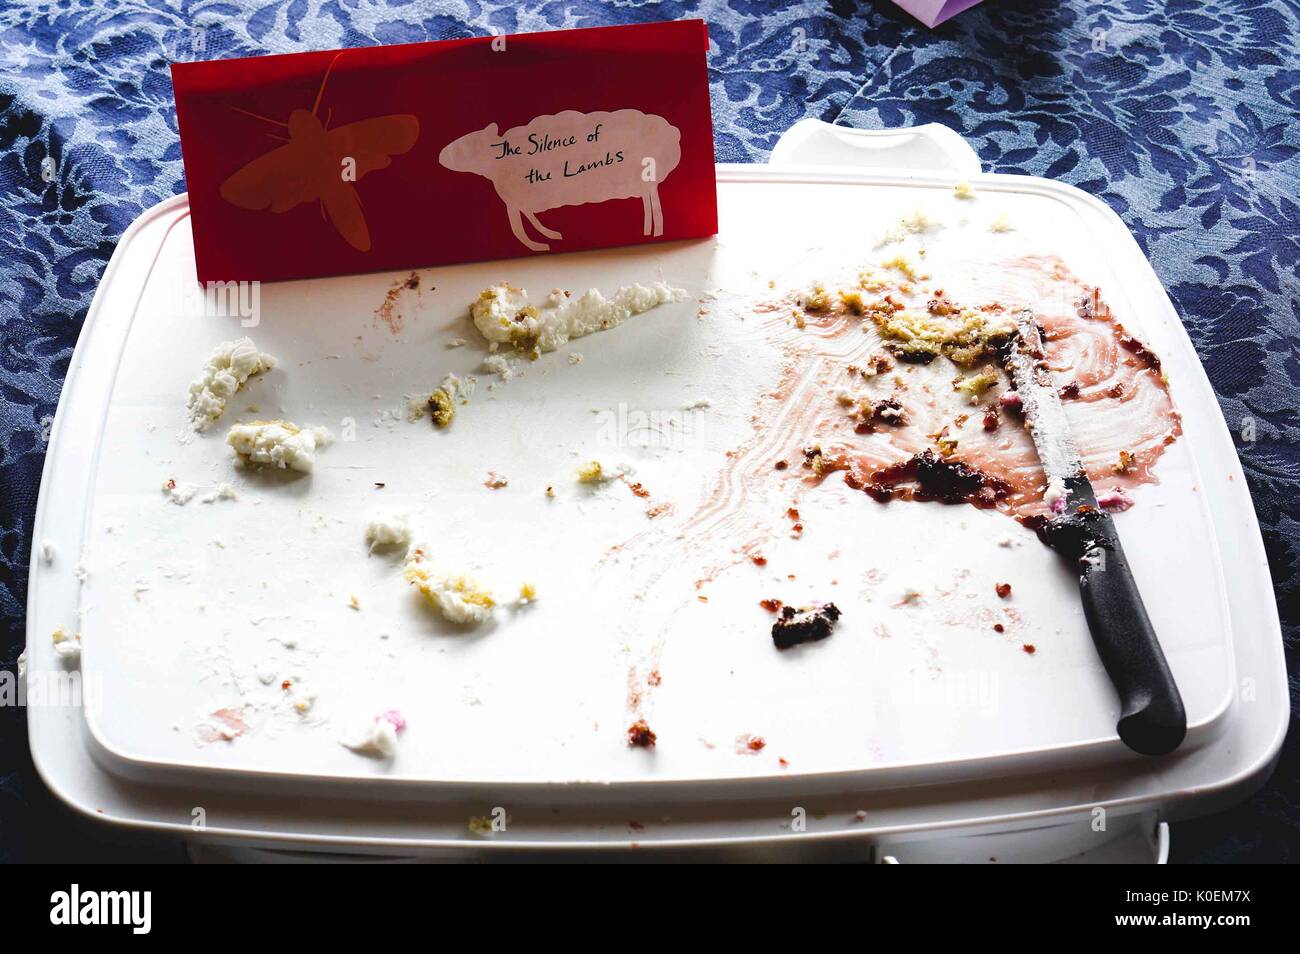 Remnants from a Silence of the Lambs cake at the 2014 Edible Book Festival, a literary cake competition for students on the Homewood campus of the Johns Hopkins University in Baltimore, Maryland, 2014. Courtesy Eric Chen. Stock Photo